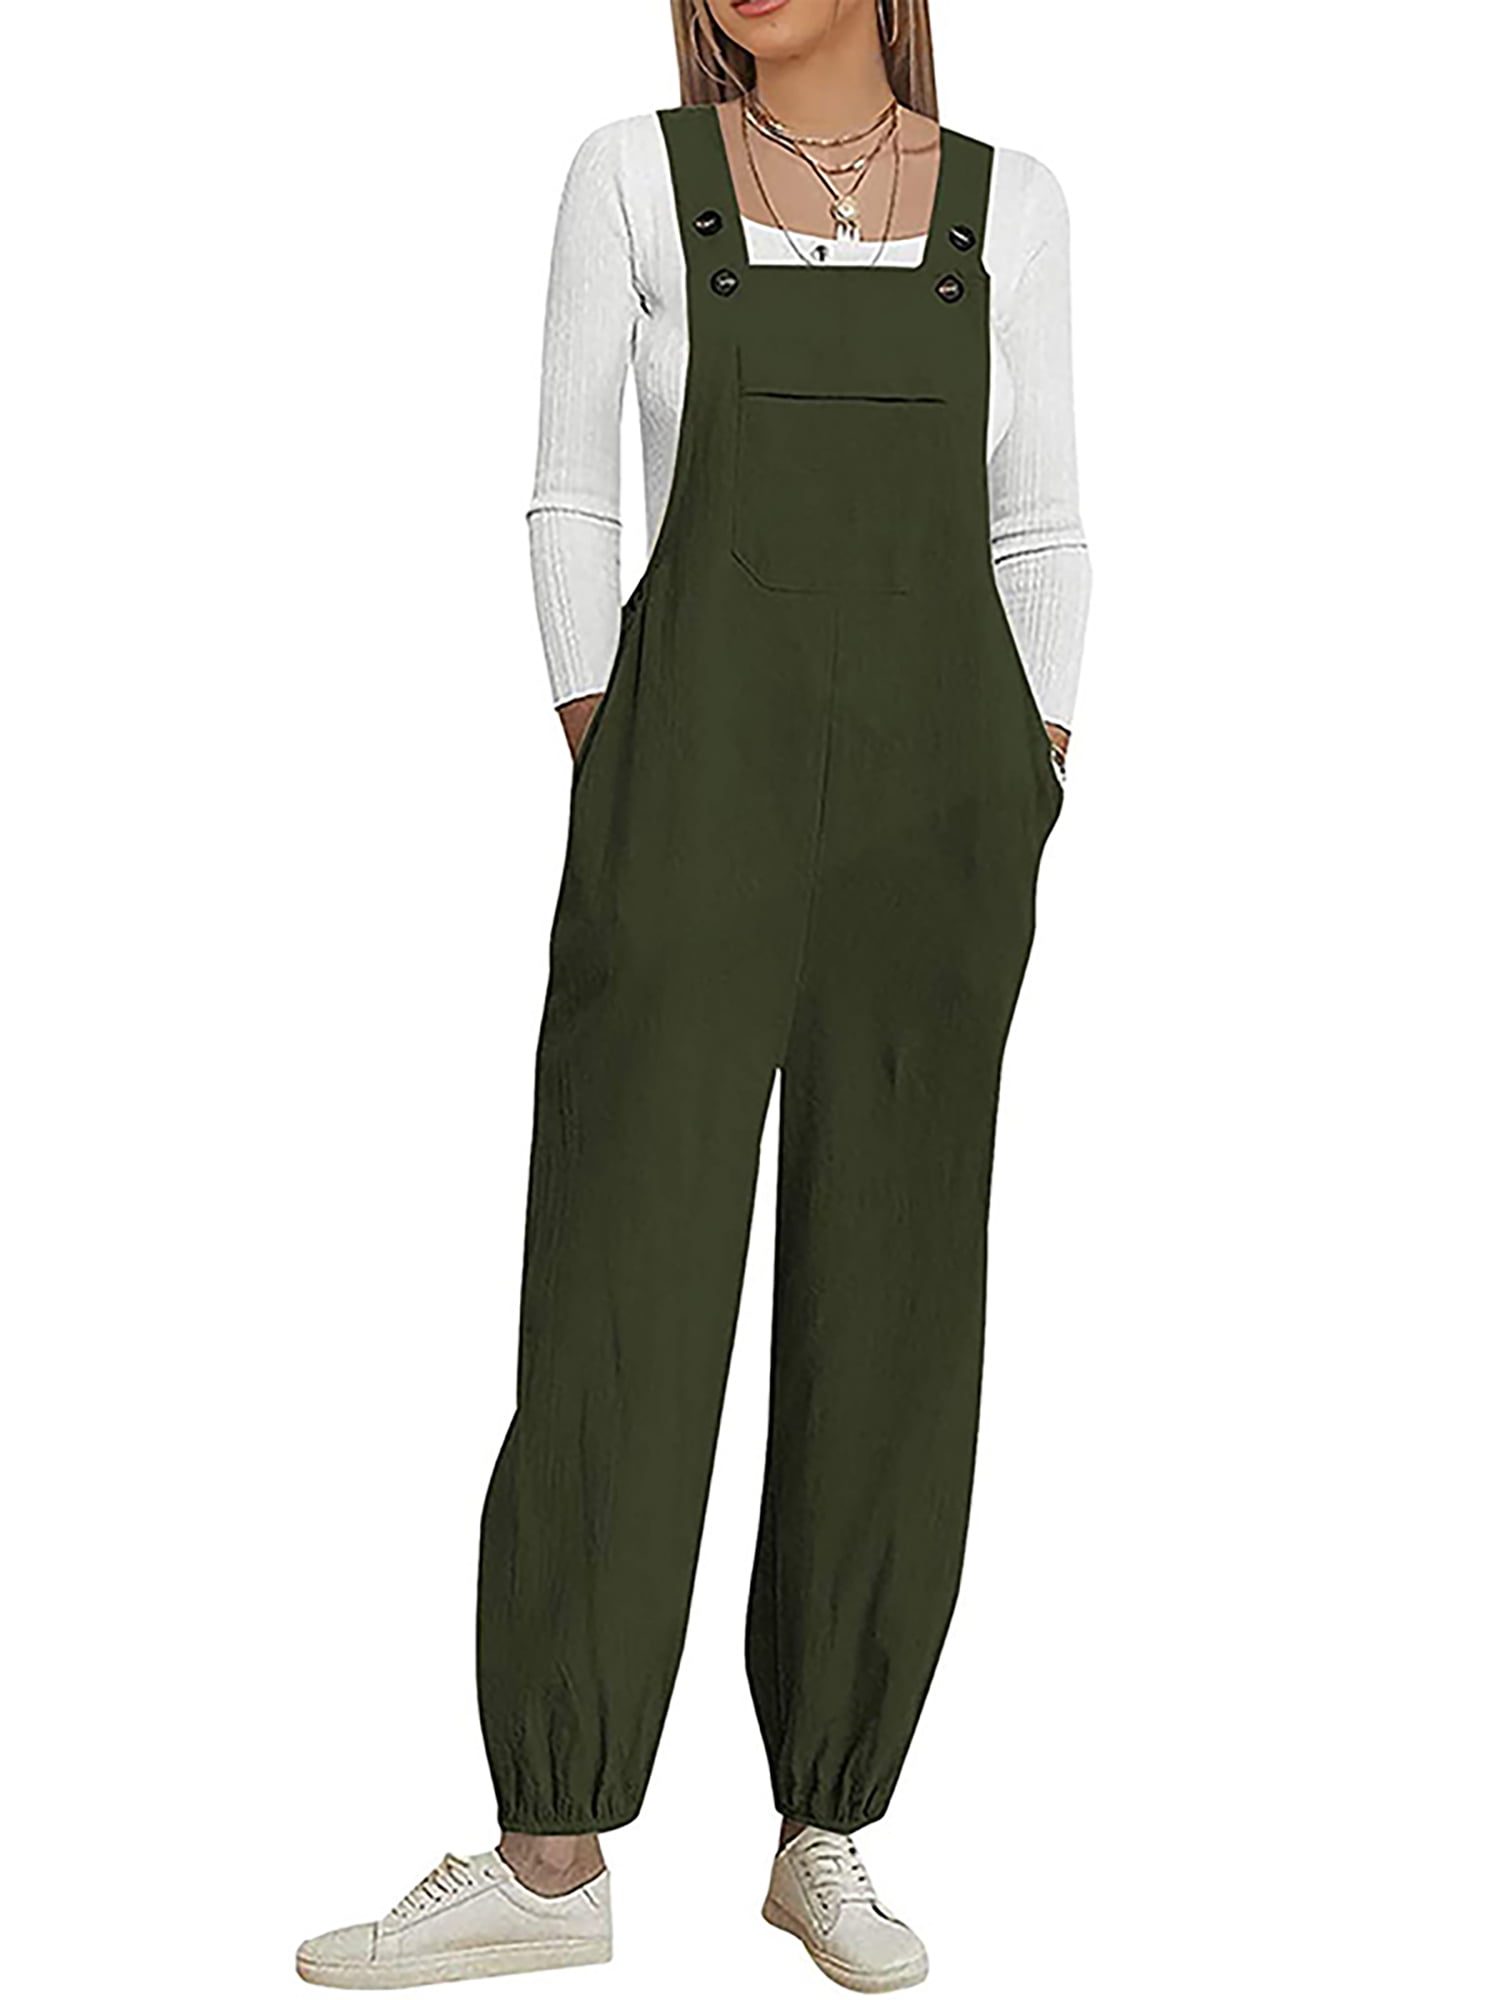 Frontwalk Women Loose Jumpsuit Dungarees Playsuit Straps Overalls Trousers  Ladies Sleeveless Baggy Pockets Pants 